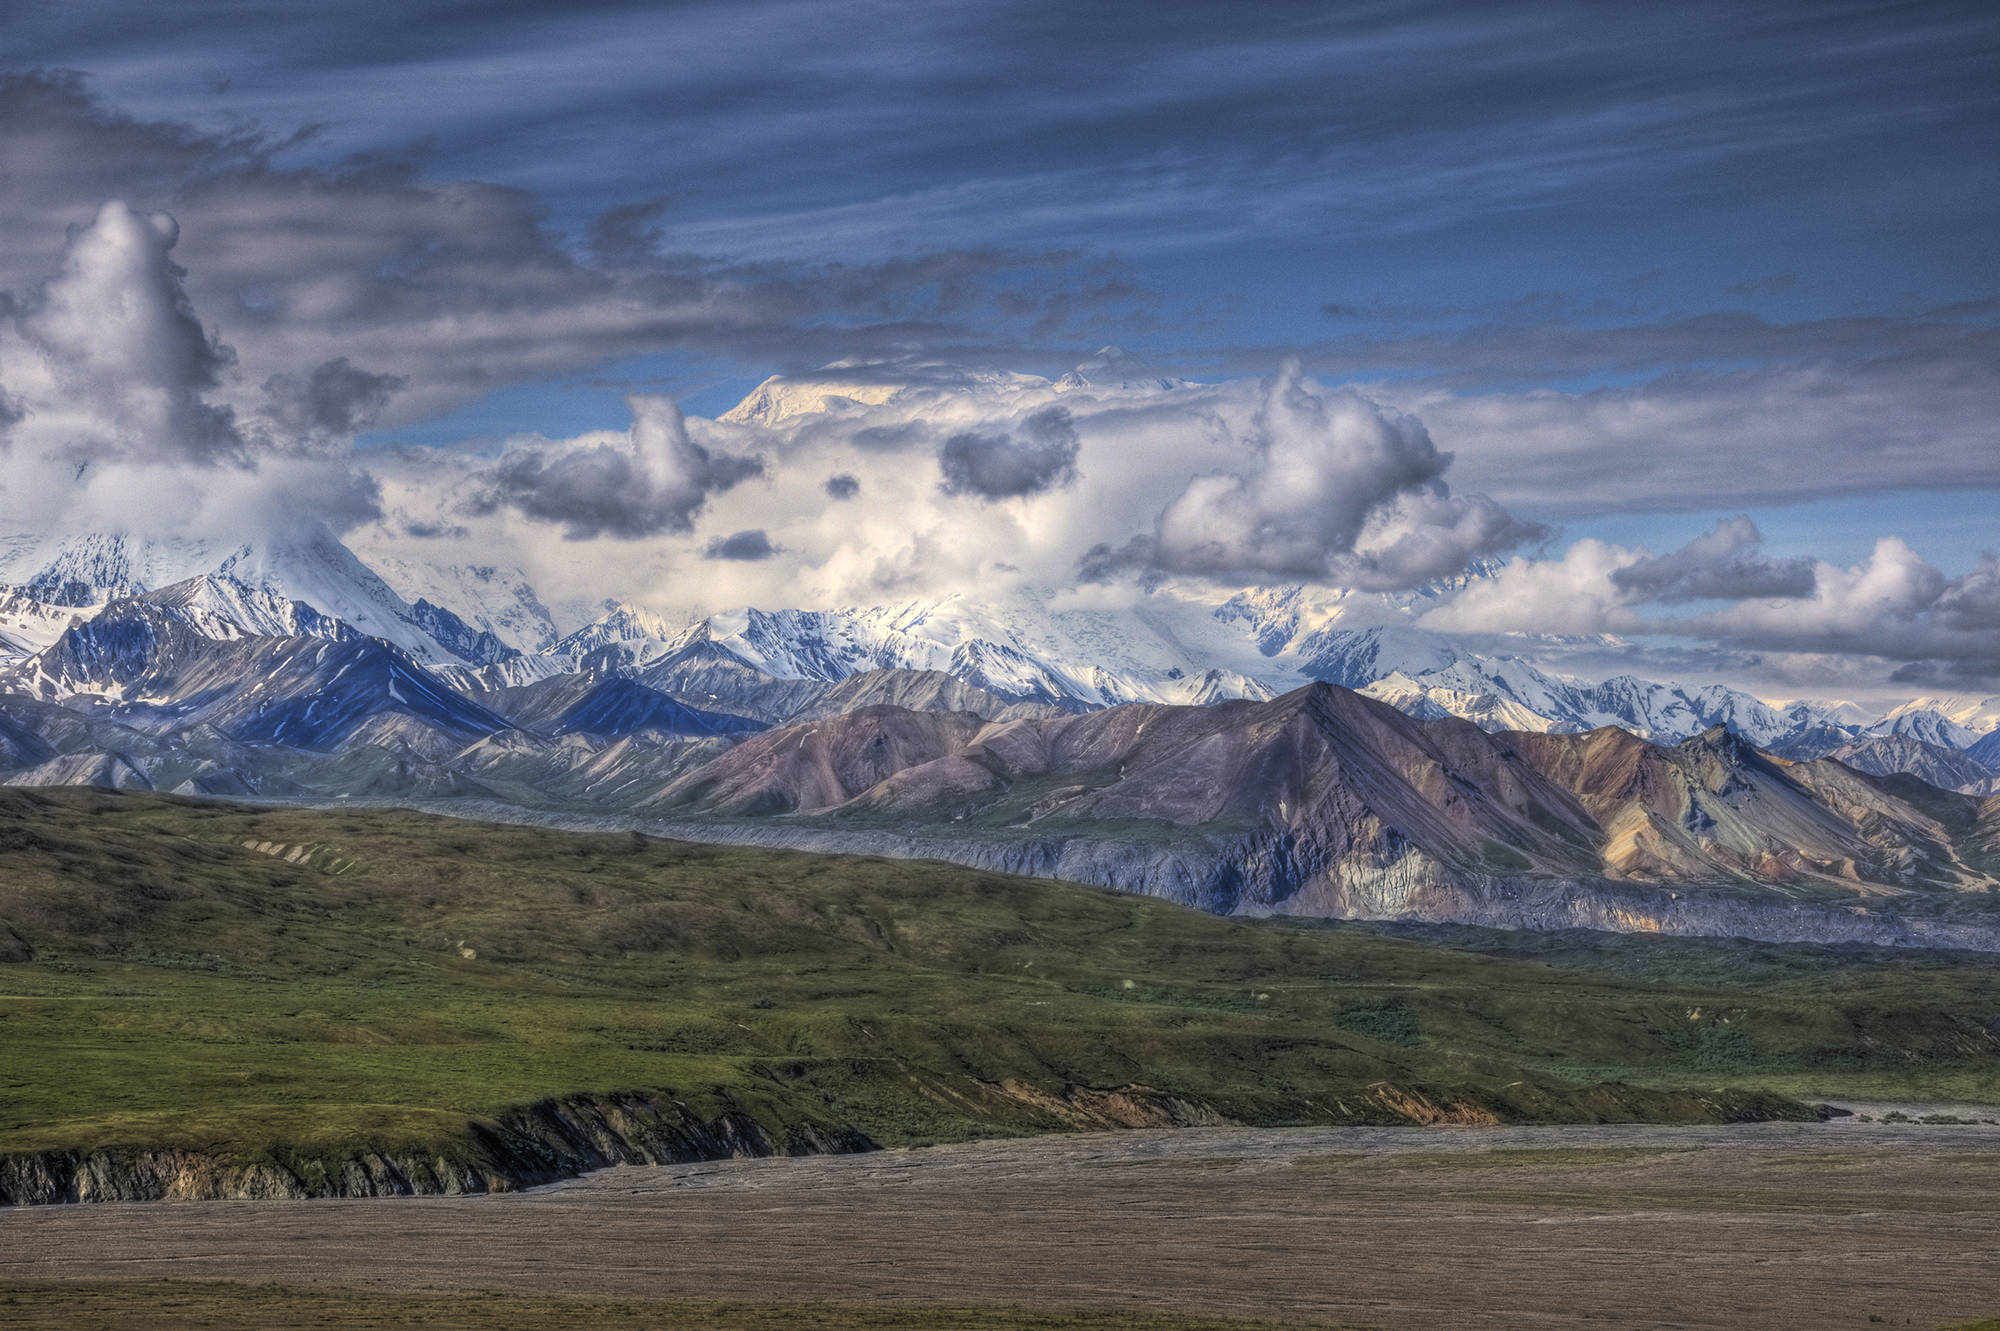 The view from Eielson visitor center in Denali National Park. (File photo)